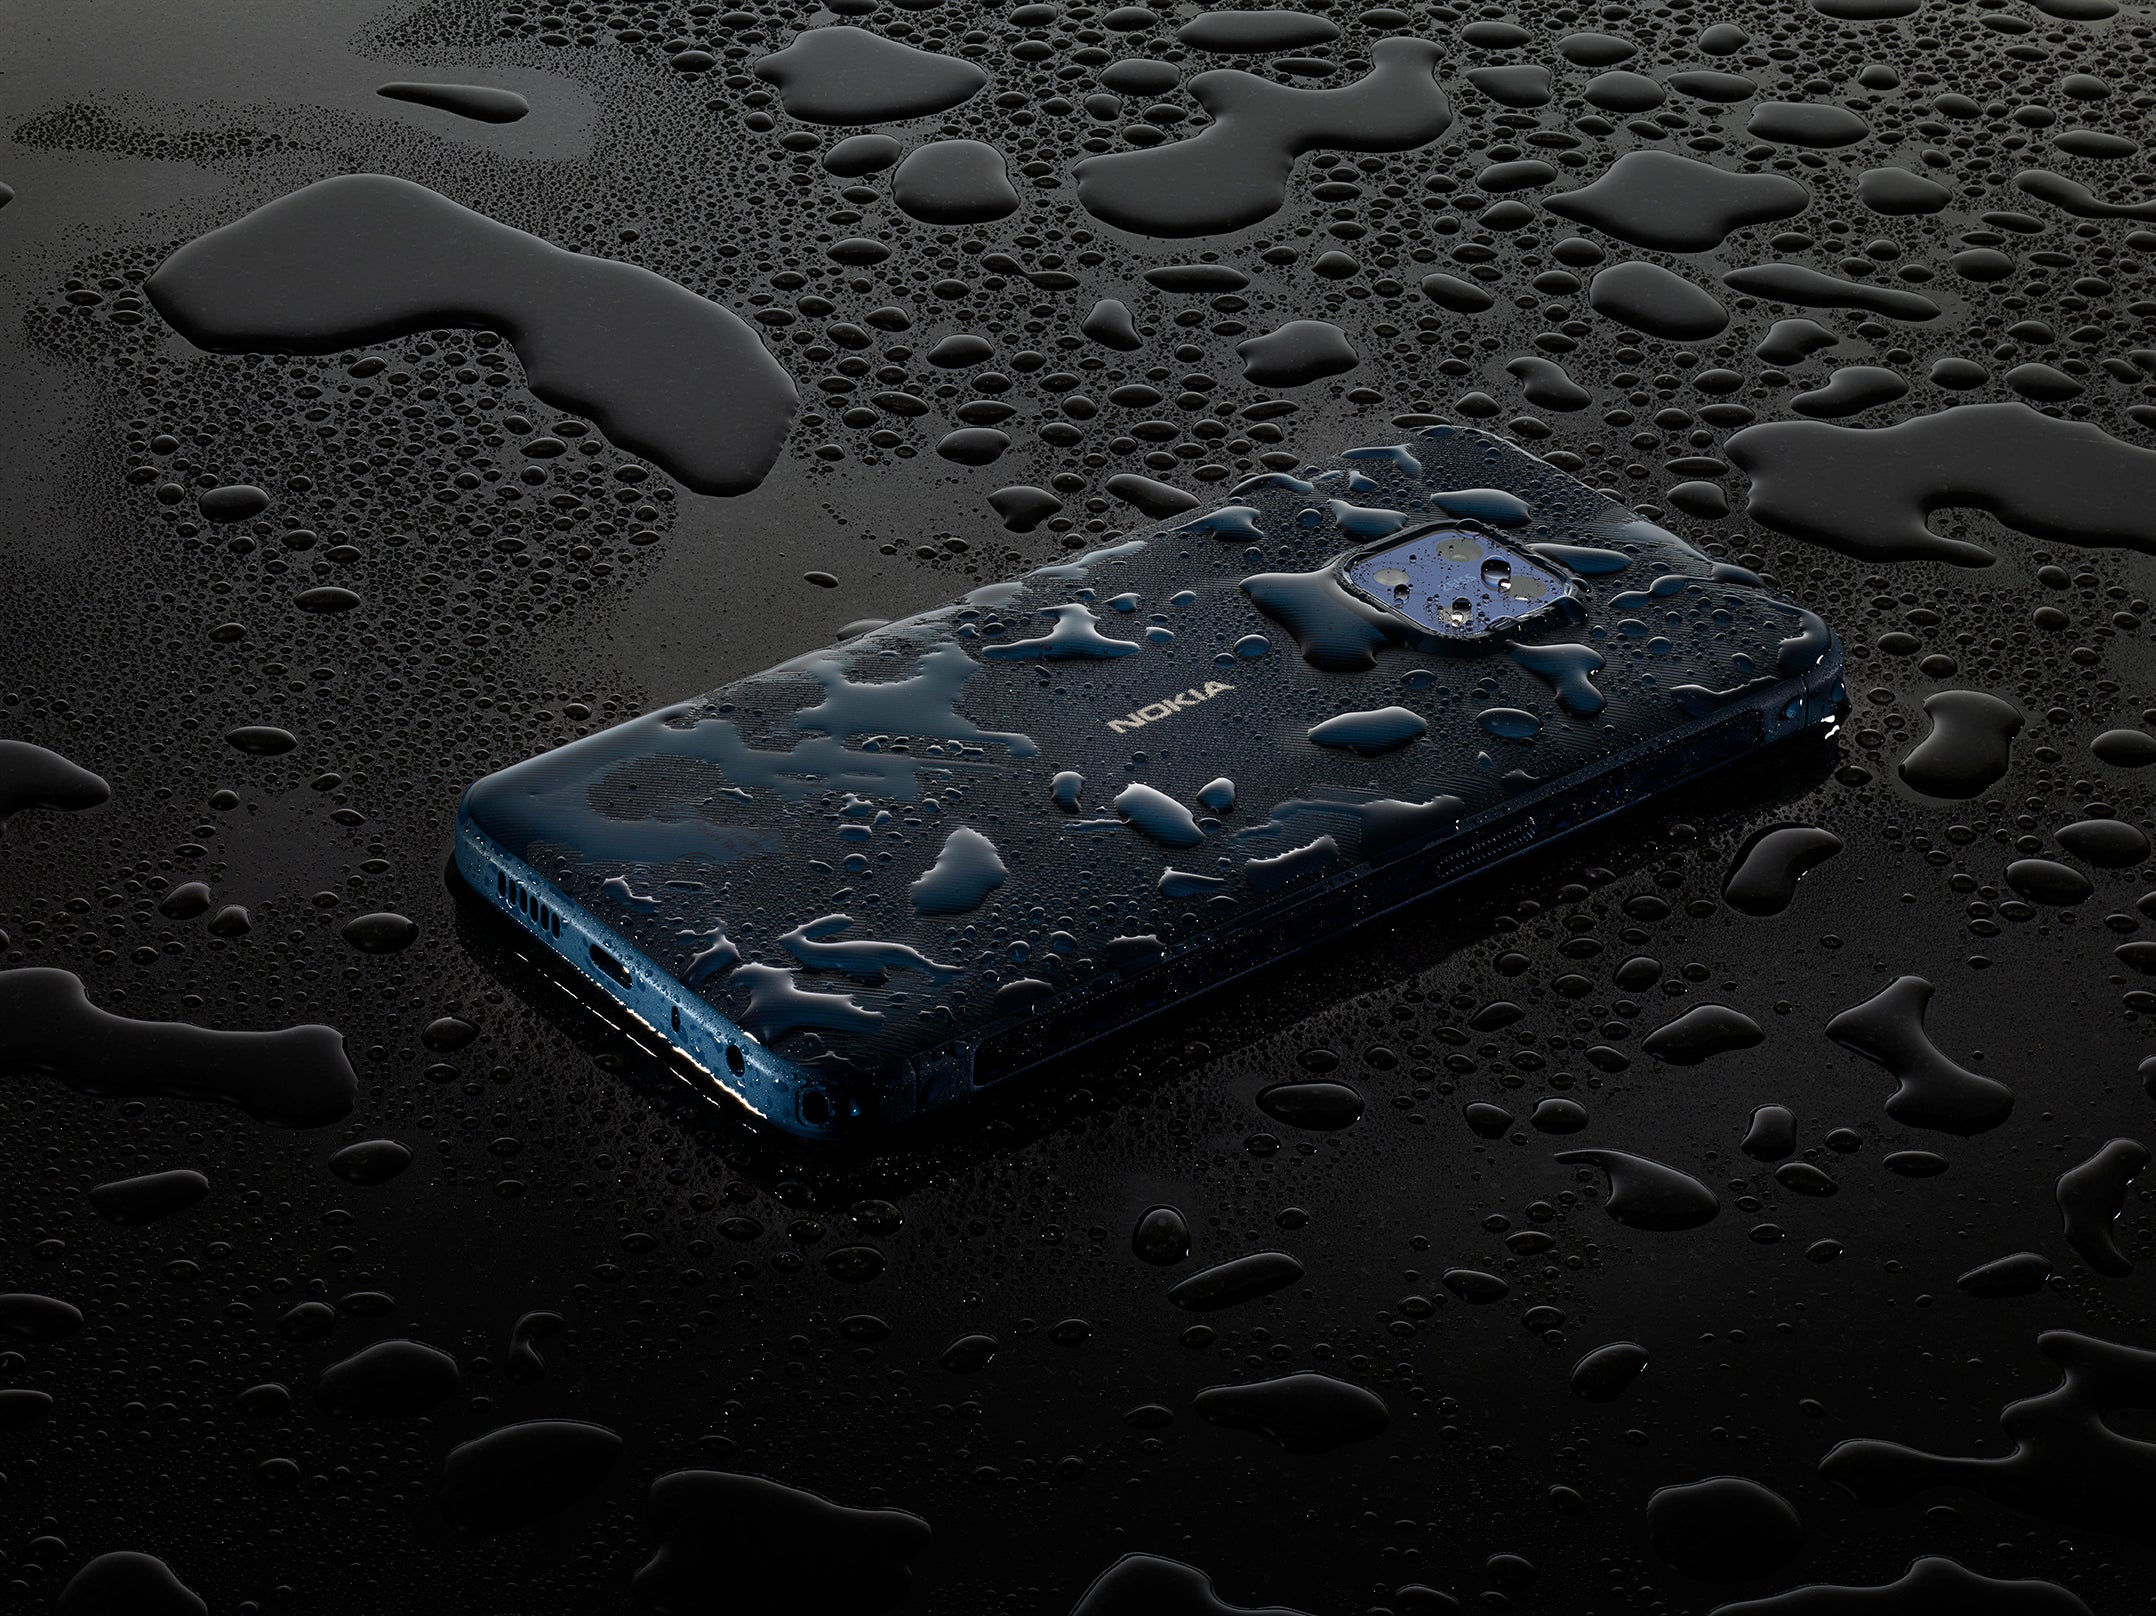 The XR20's rugged capabilities and decent performance make it one of the best smartphones in its class - Nokia XR20 and C30 are official; Check out HMD's first rugged smartphone